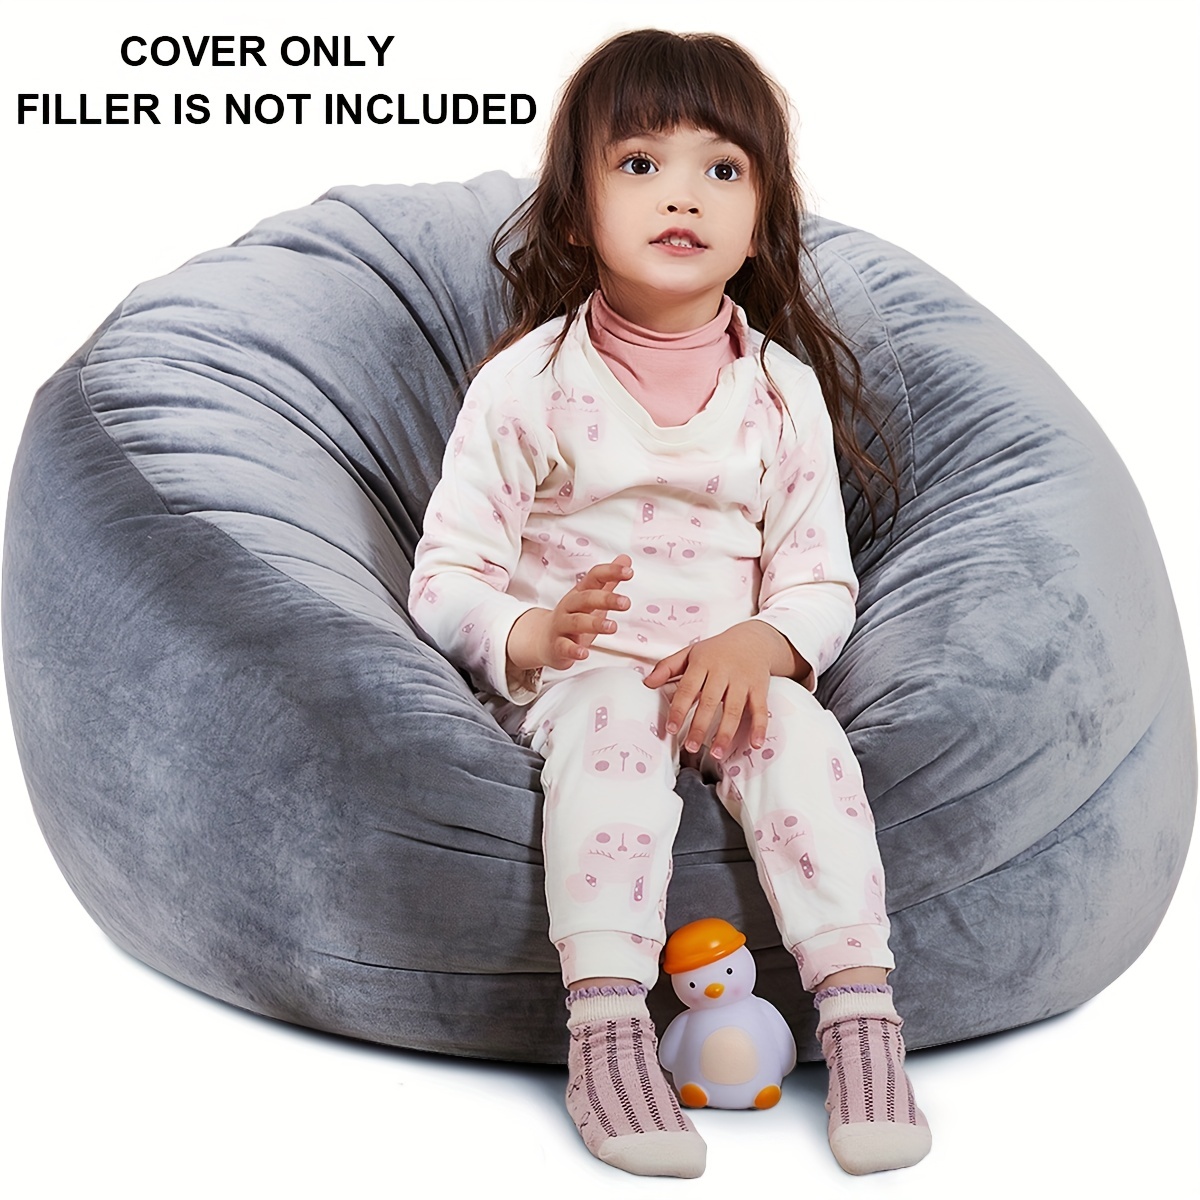 Seat Lazy Sofa Bean Bag Liner Inner for Teens, Kids and Adults. Zipper  Insert Replacement Cover Case Liner, Eazy Cleaning Storing Stuffed Animals.  (